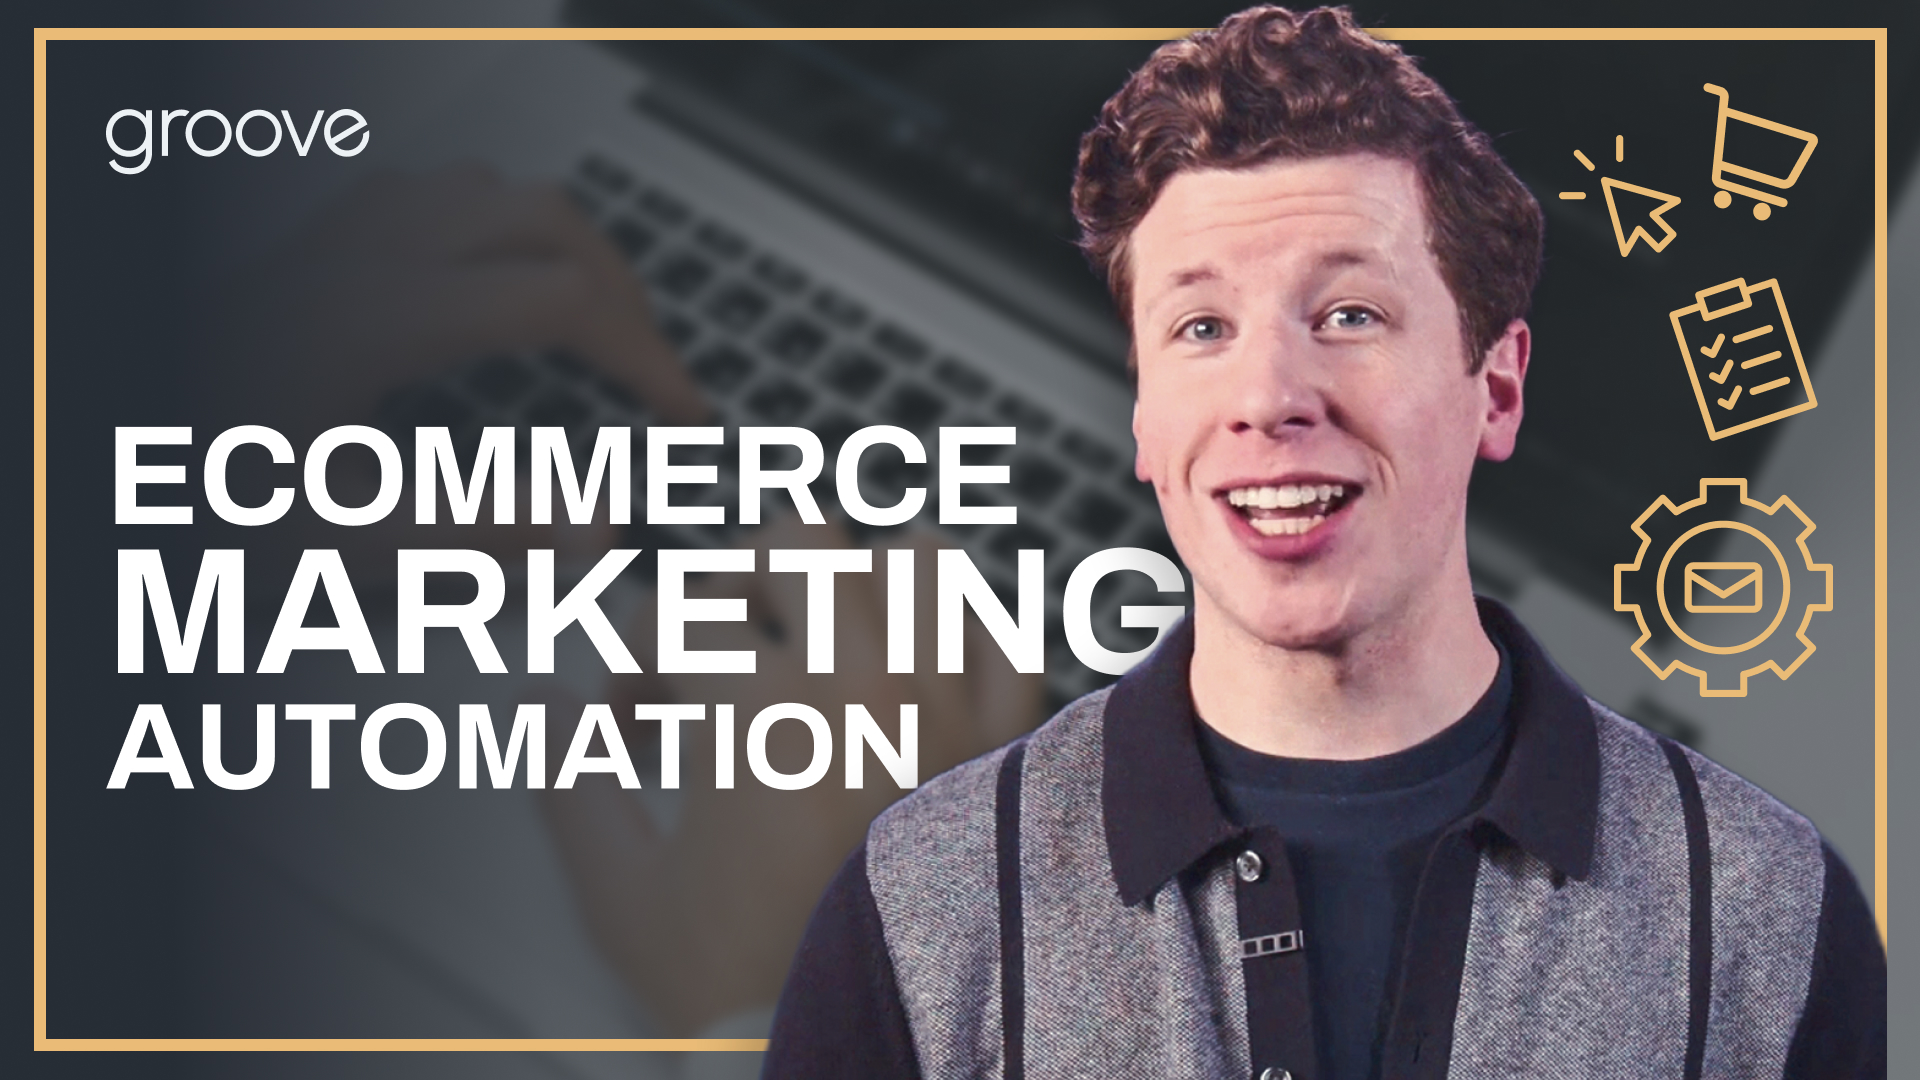 eCommerce Marketing Automation: Your eCommerce Guide To 3 Common Flows